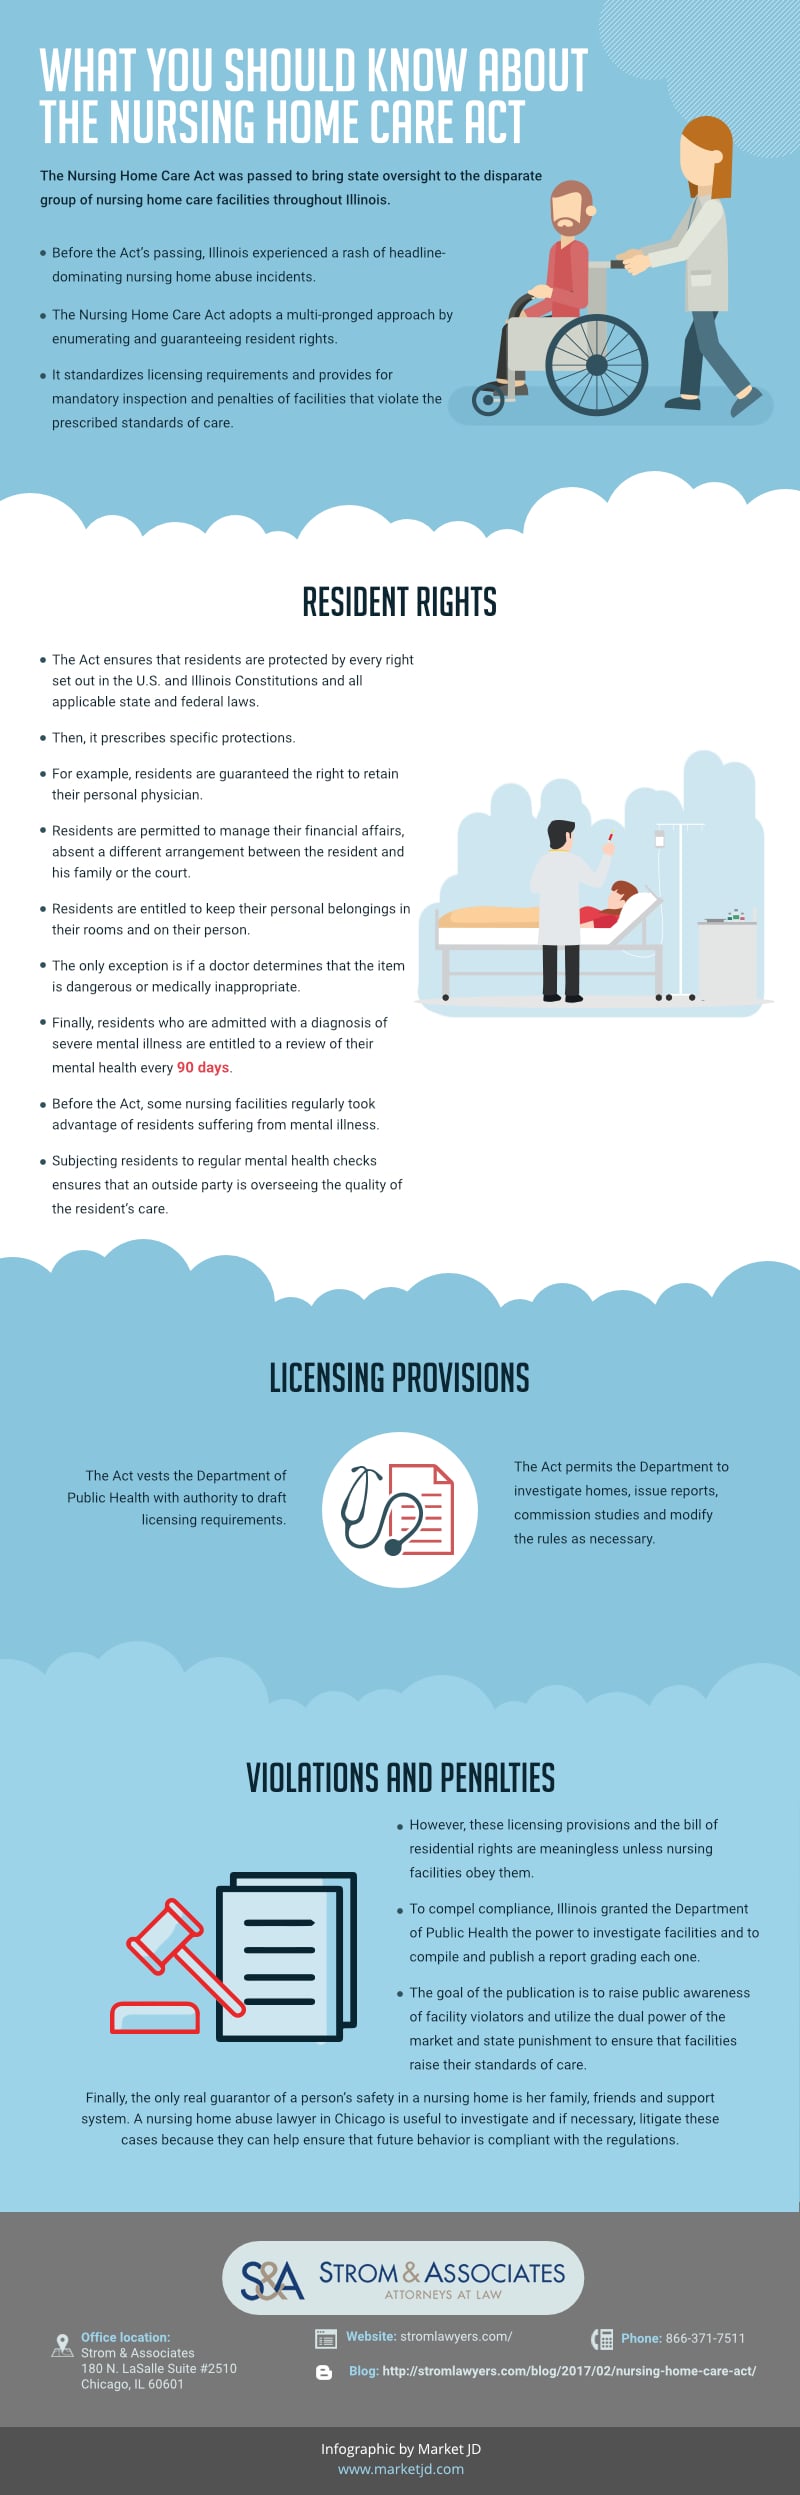 Nursing home care act infographic